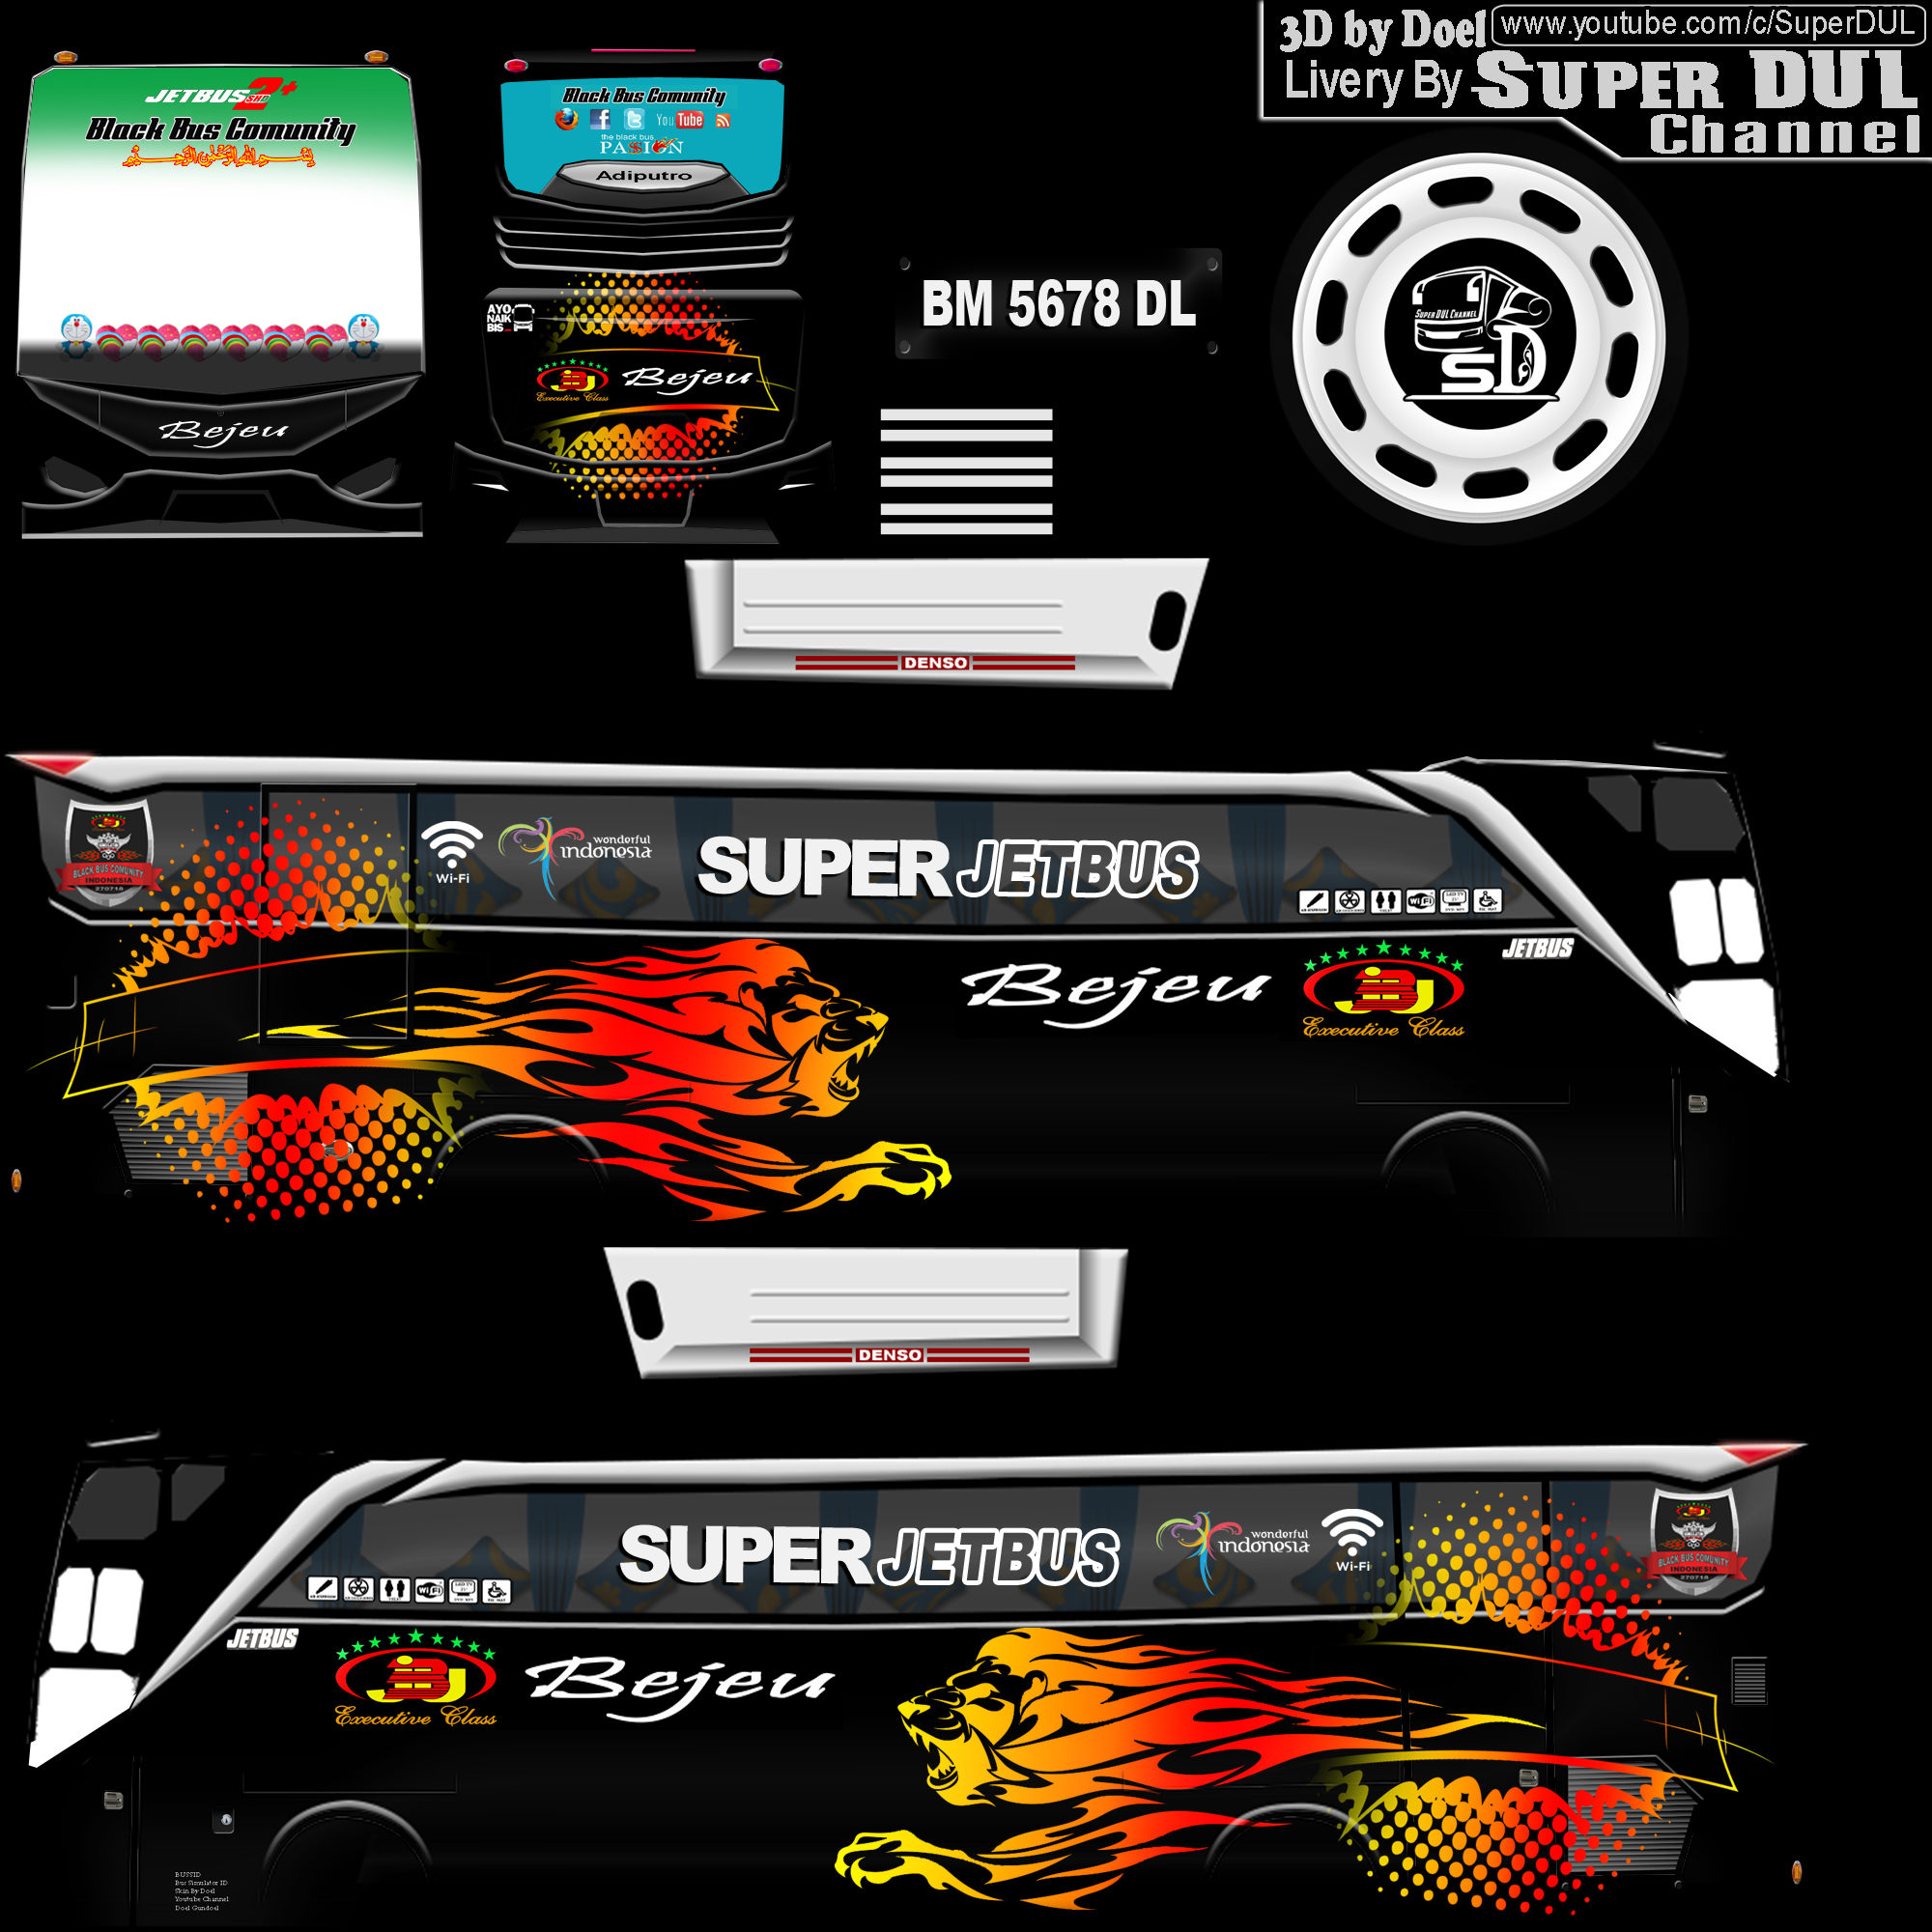 Discover the coolest Livery bussid image. Bus games, Star bus, Bus coach